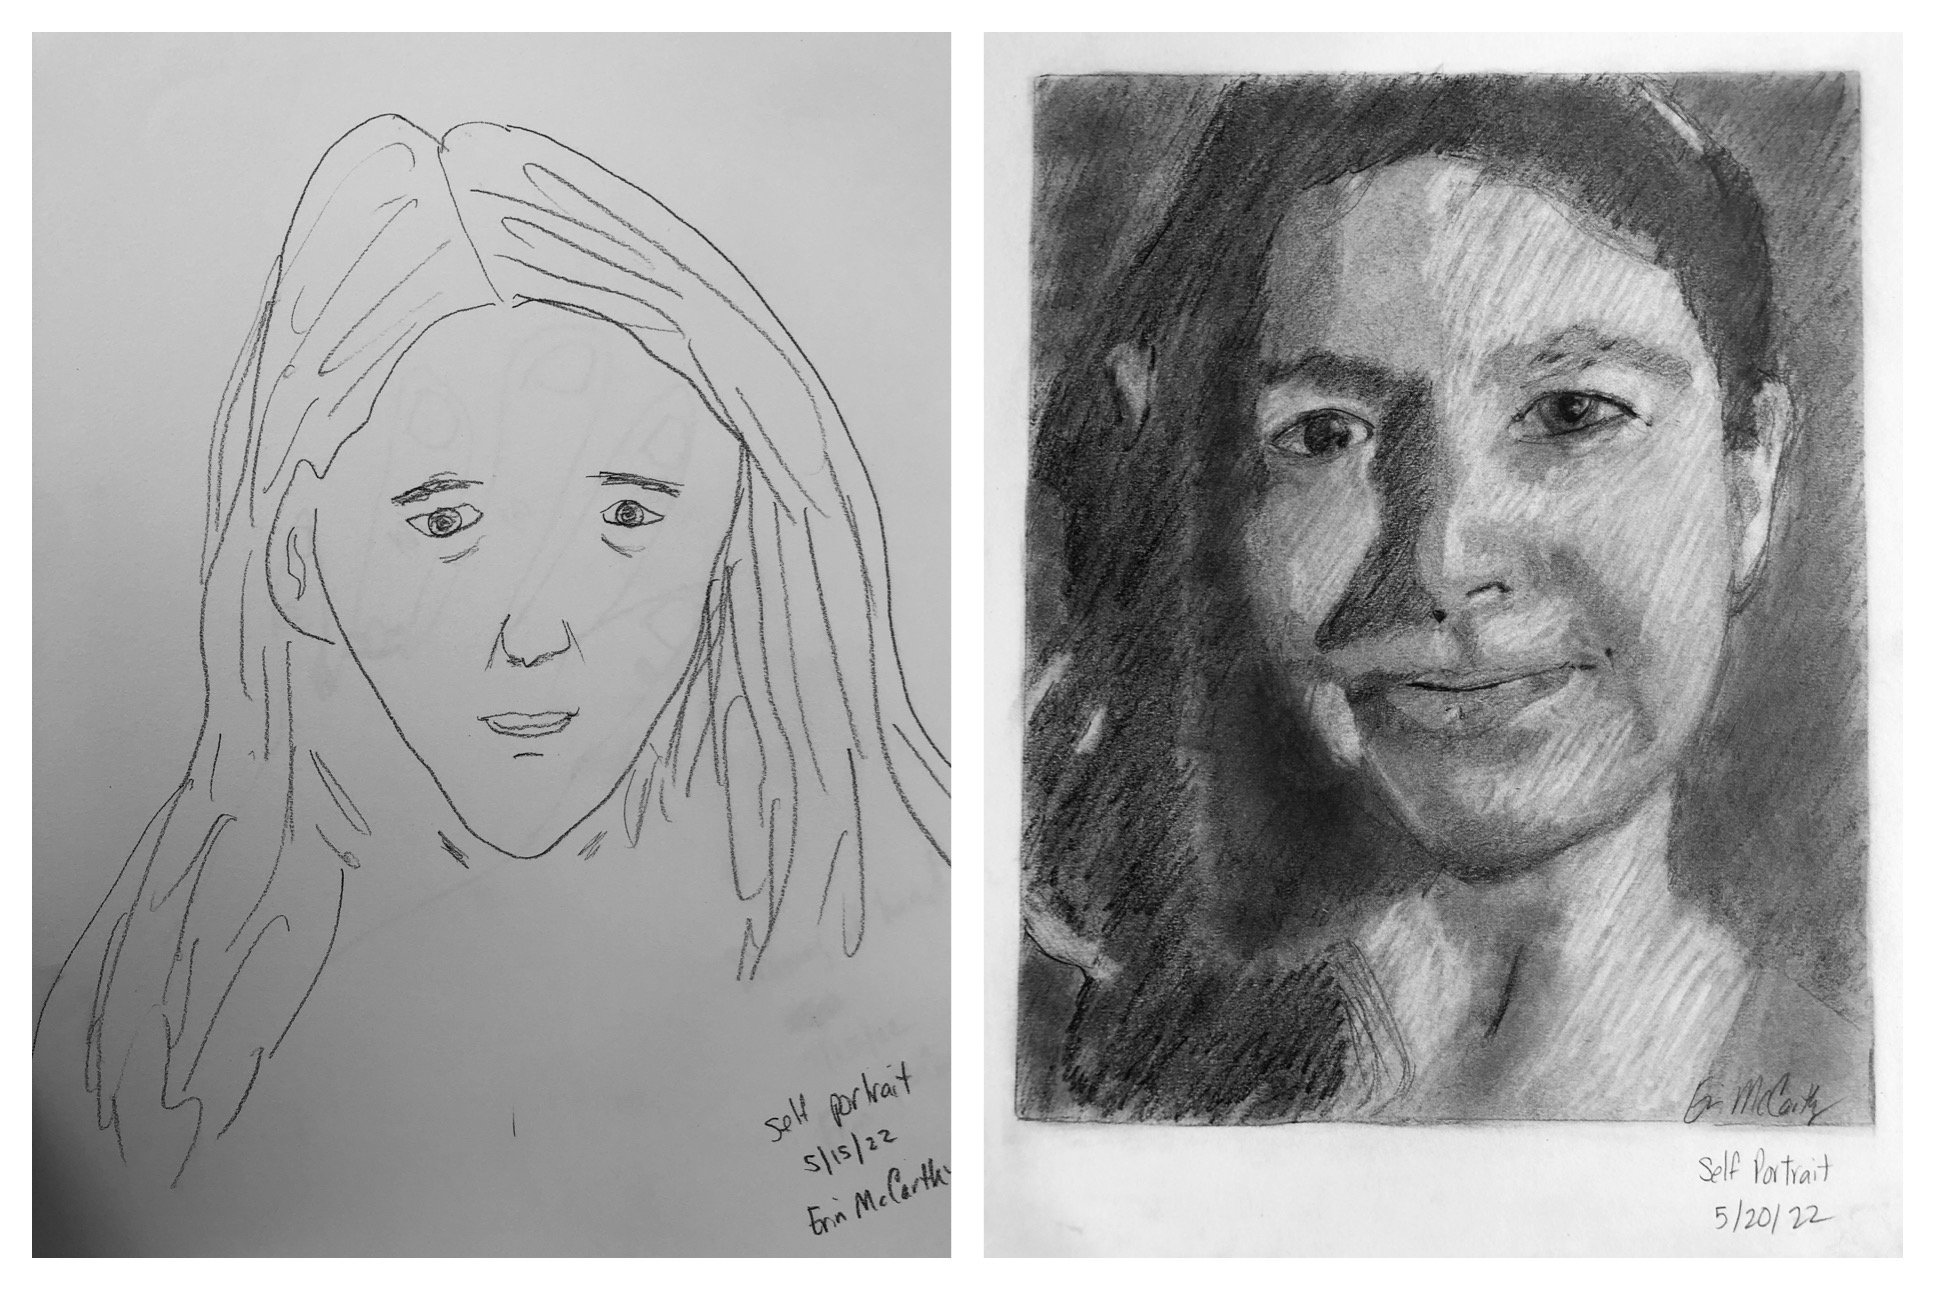 Erin's Before and After Self-Portraits